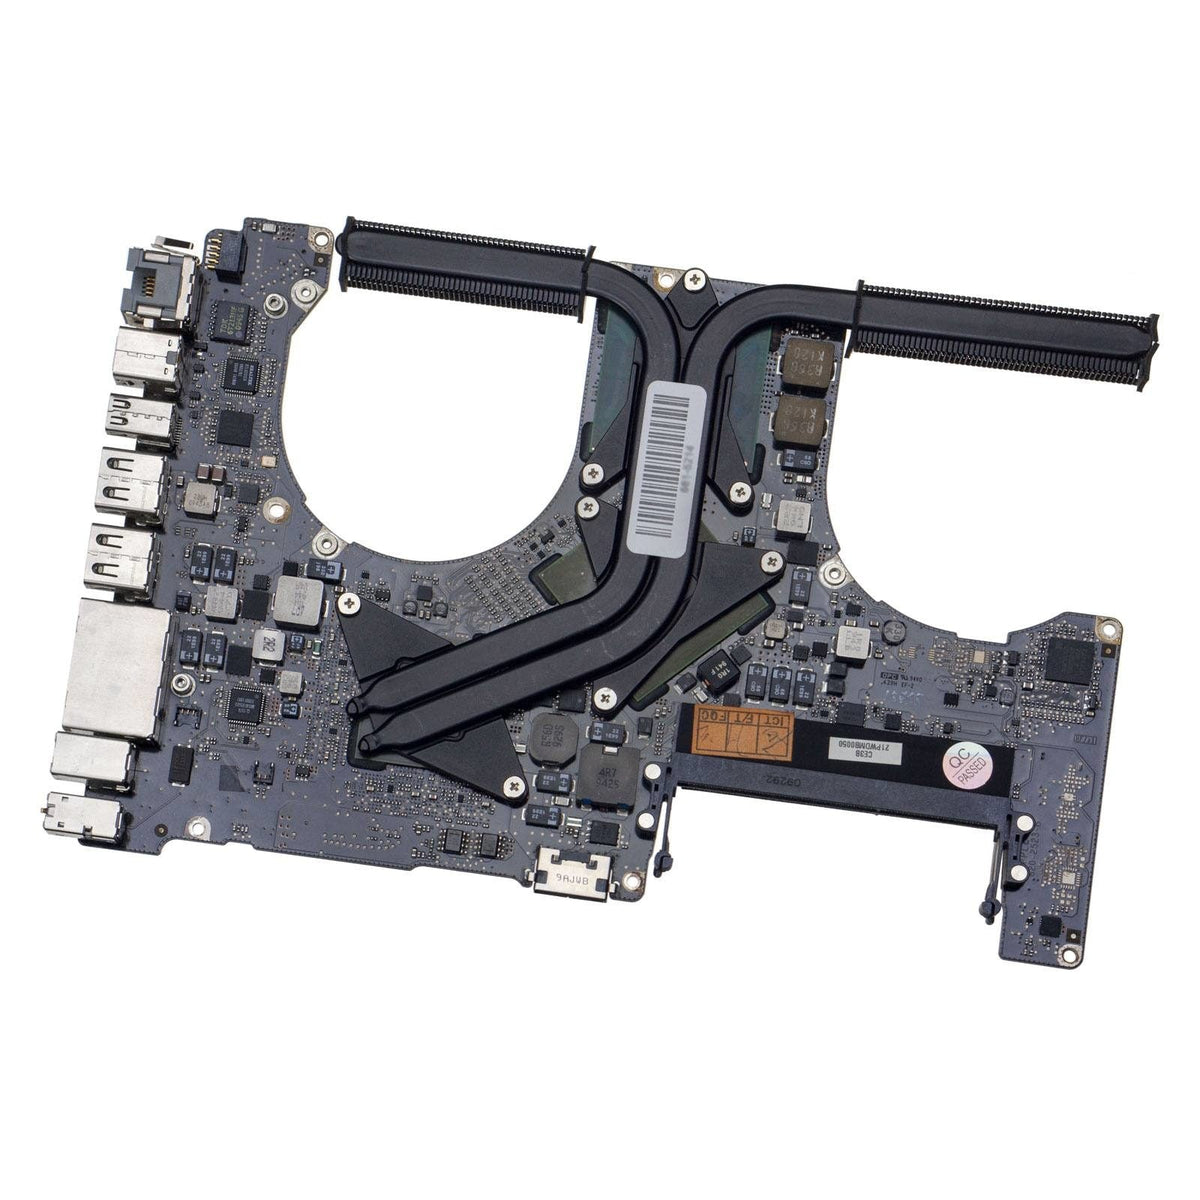 MOTHERBOARD FOR MACBOOK PRO 15" A1286 (MID 2009)